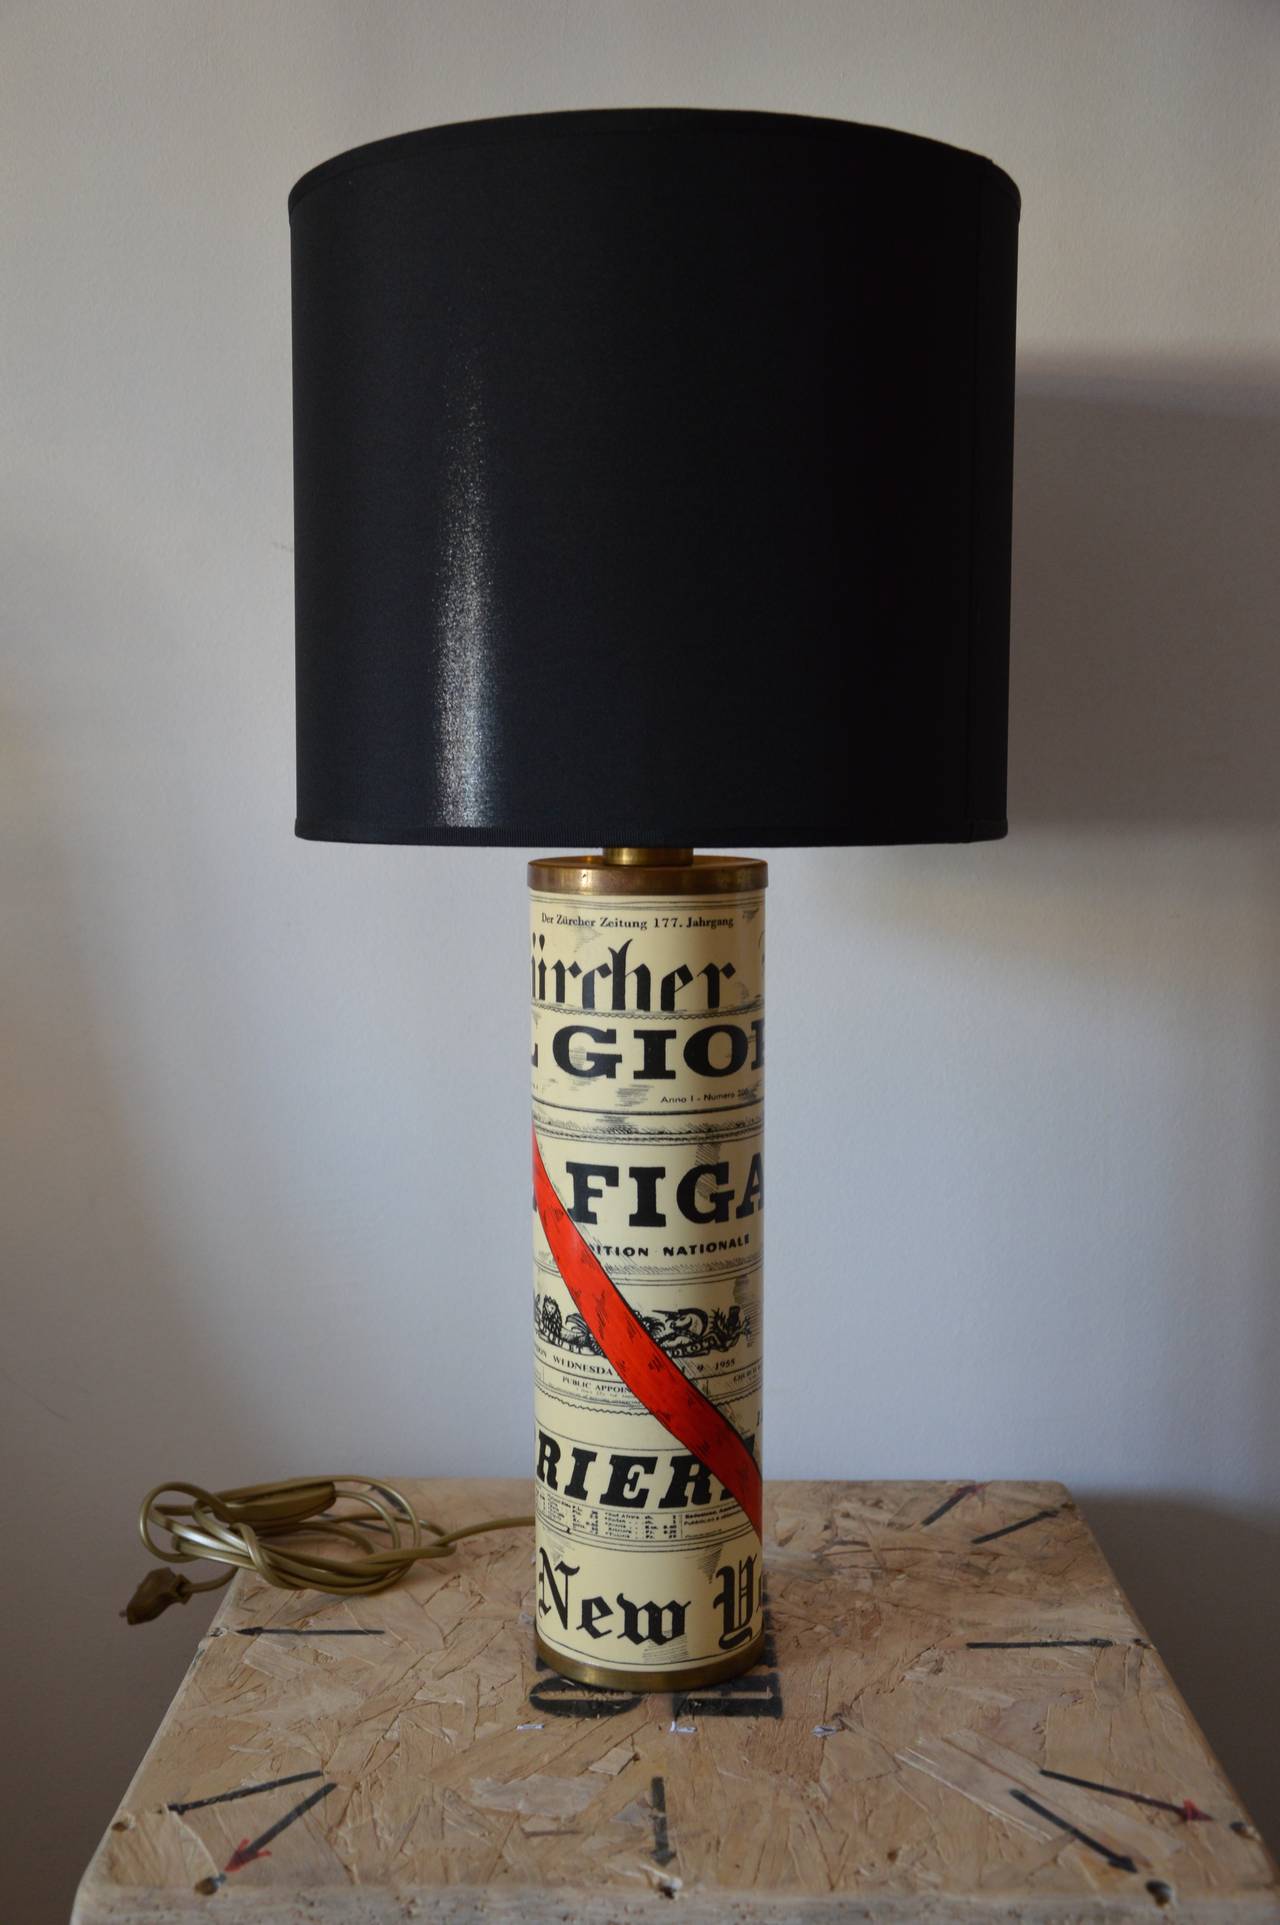 White Cream table lamp by Piero Fornasetti with decor of Press titles. 
Base is brass, black clothe lampshade golden inside. Signed Fornasetti Milano on the bottom. 
Dimensions : 
H : 43cm
Diameter : 10cm 
H lamp + lampshade : 64cm 
Diameter